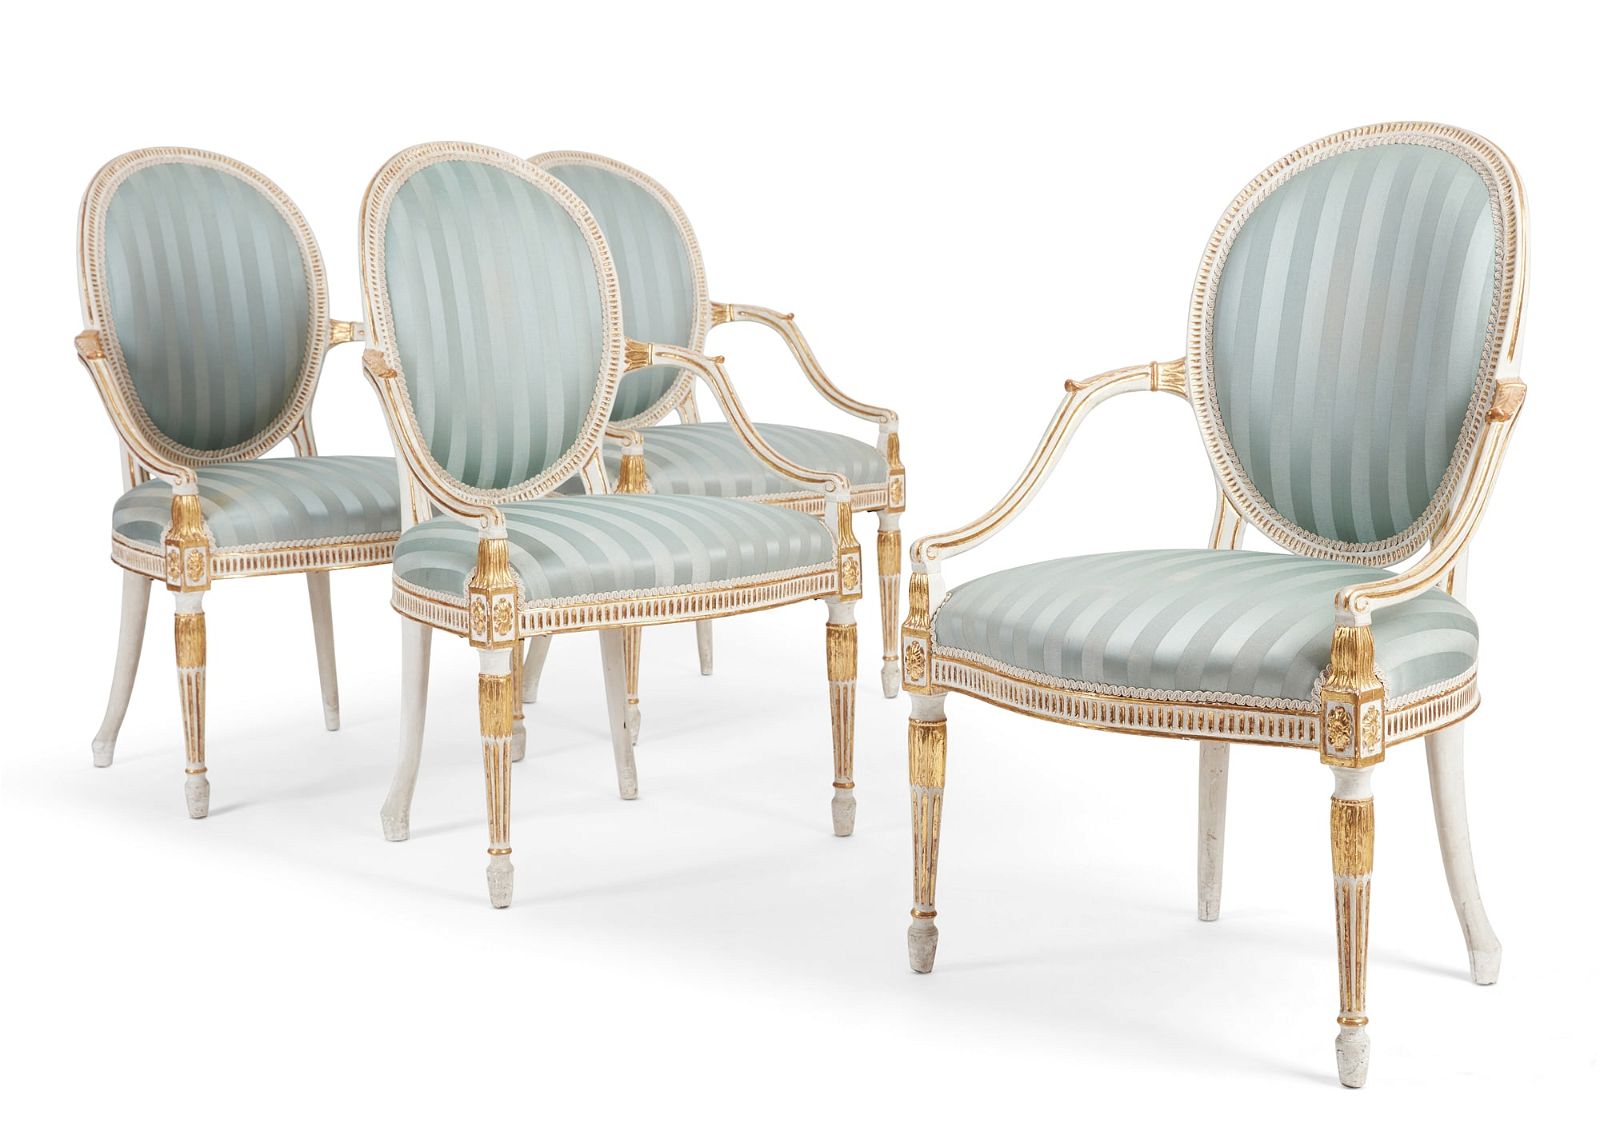 FOUR GEORGE III PARCEL GILT PAINTED